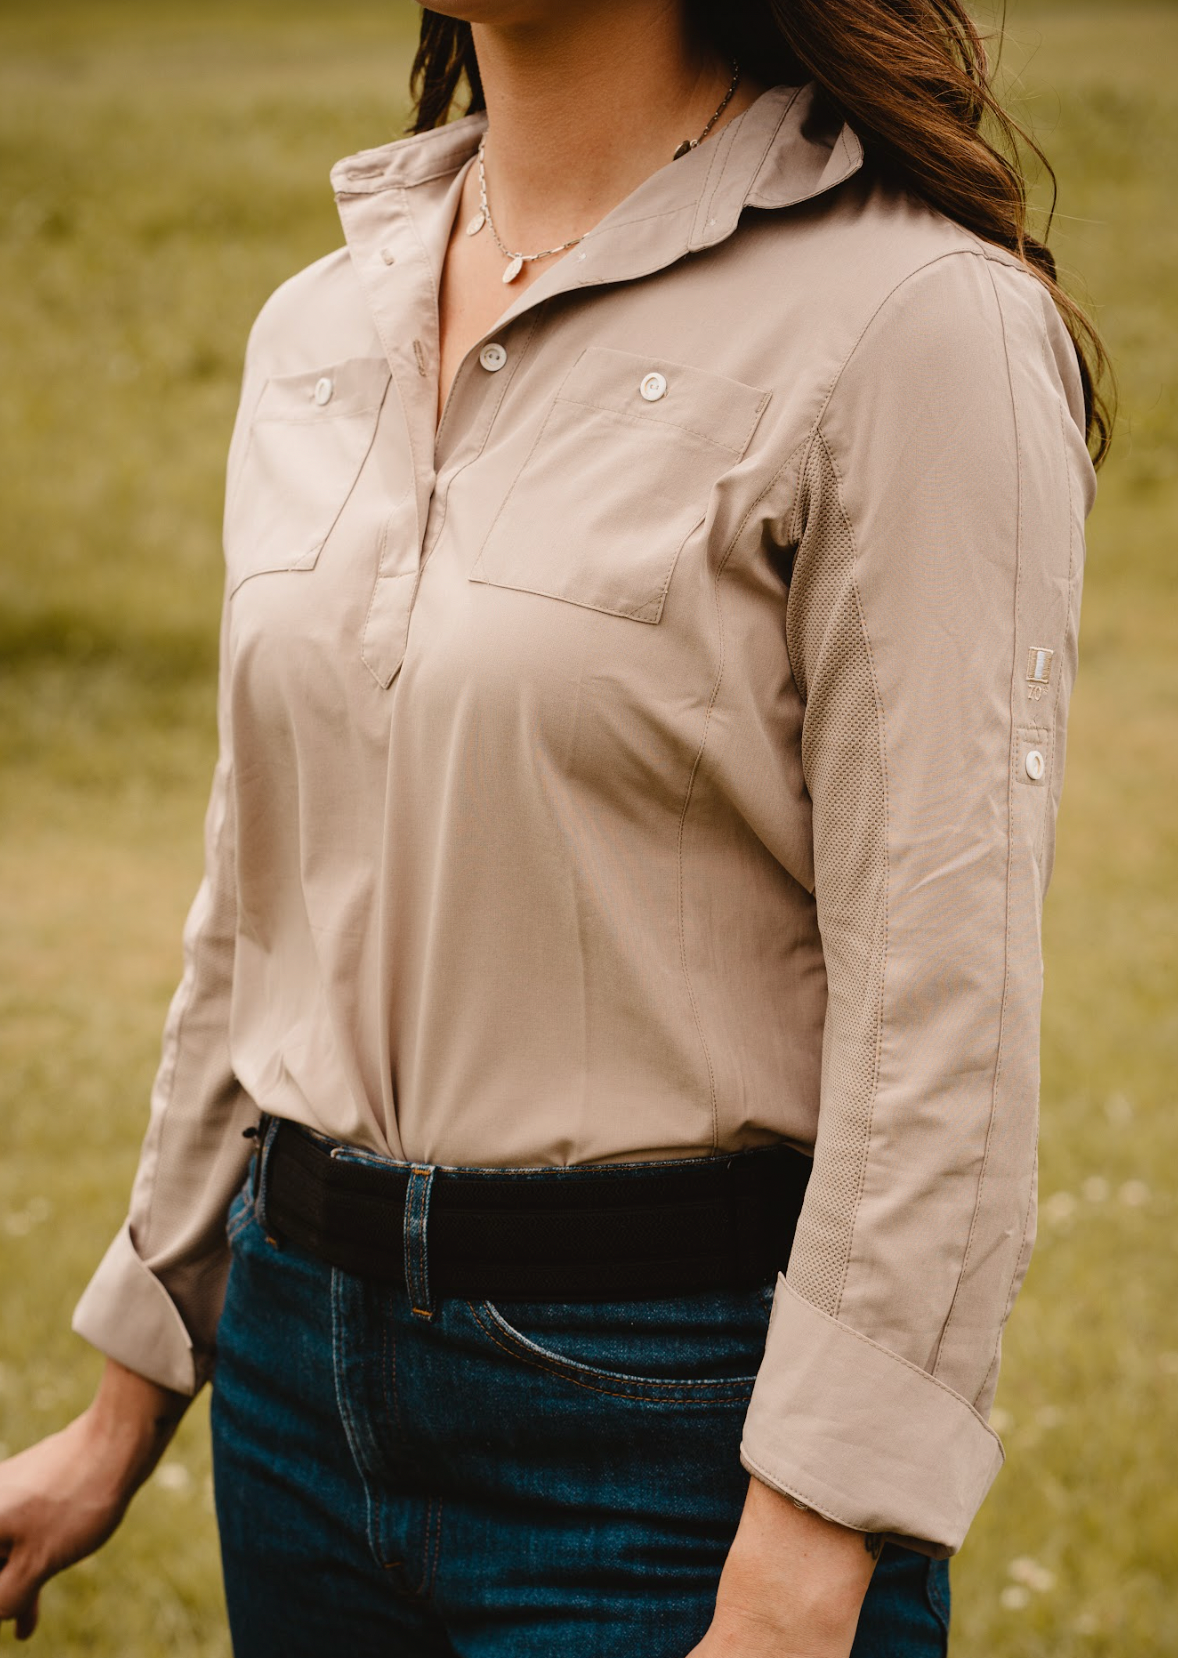 The Classic Safari Sun Shirt with UPF 50+ Sun Protection – State of Equine